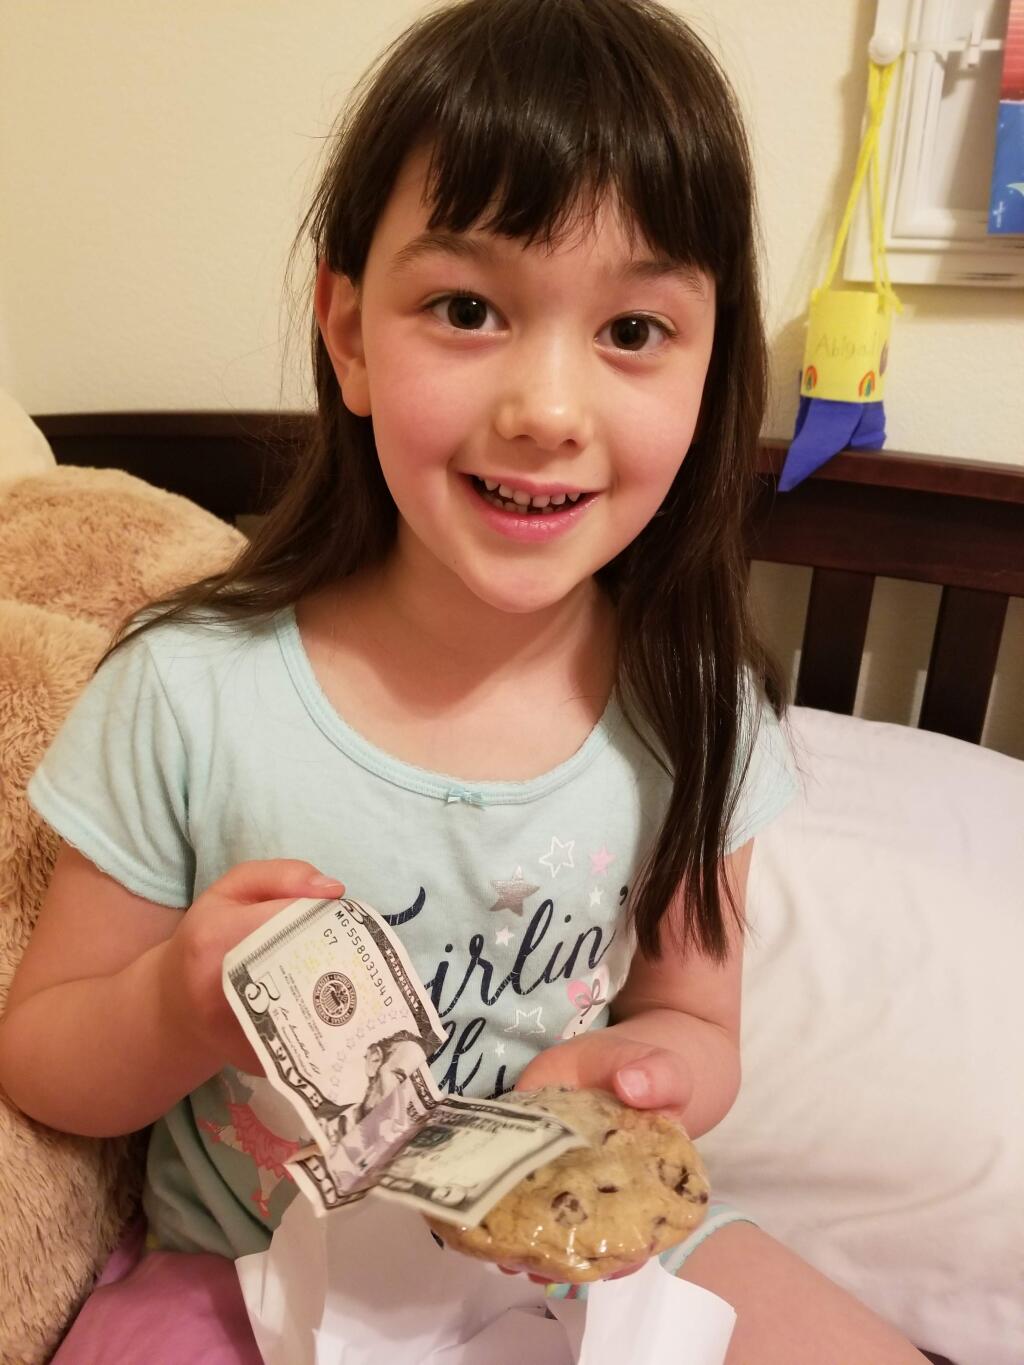 The Tooth Fairy delivered Abigail $5 and a cookie.